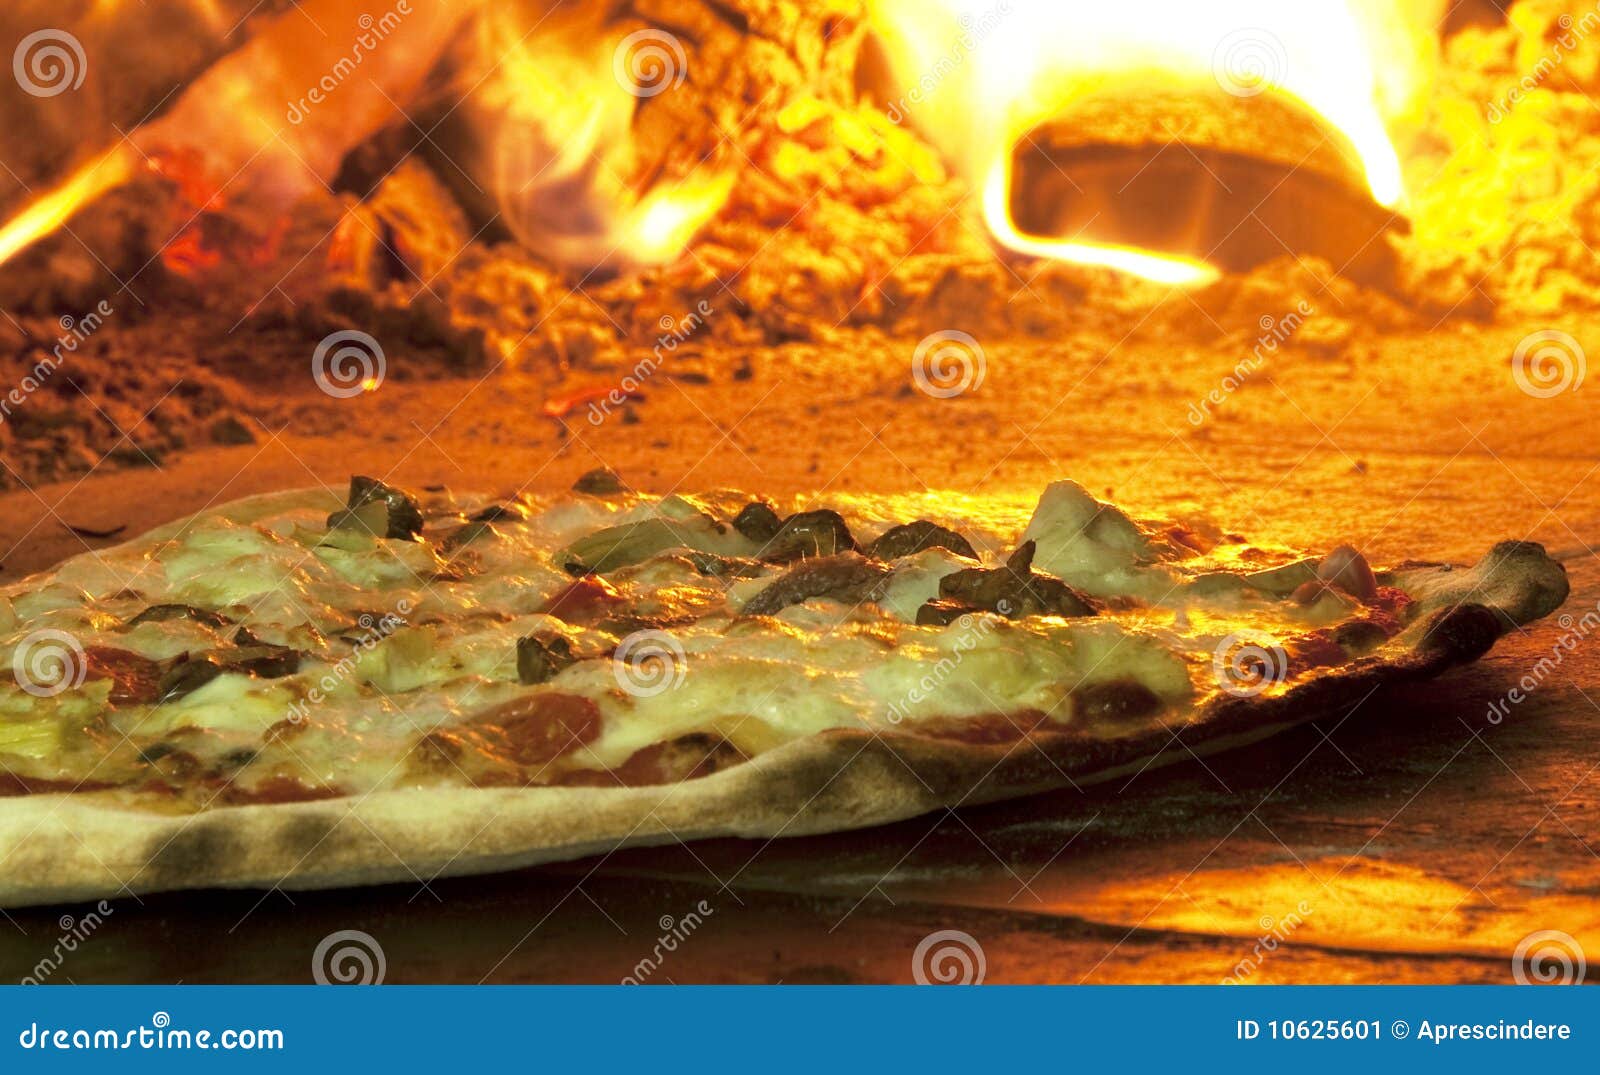 italian pizza in a wood burning oven